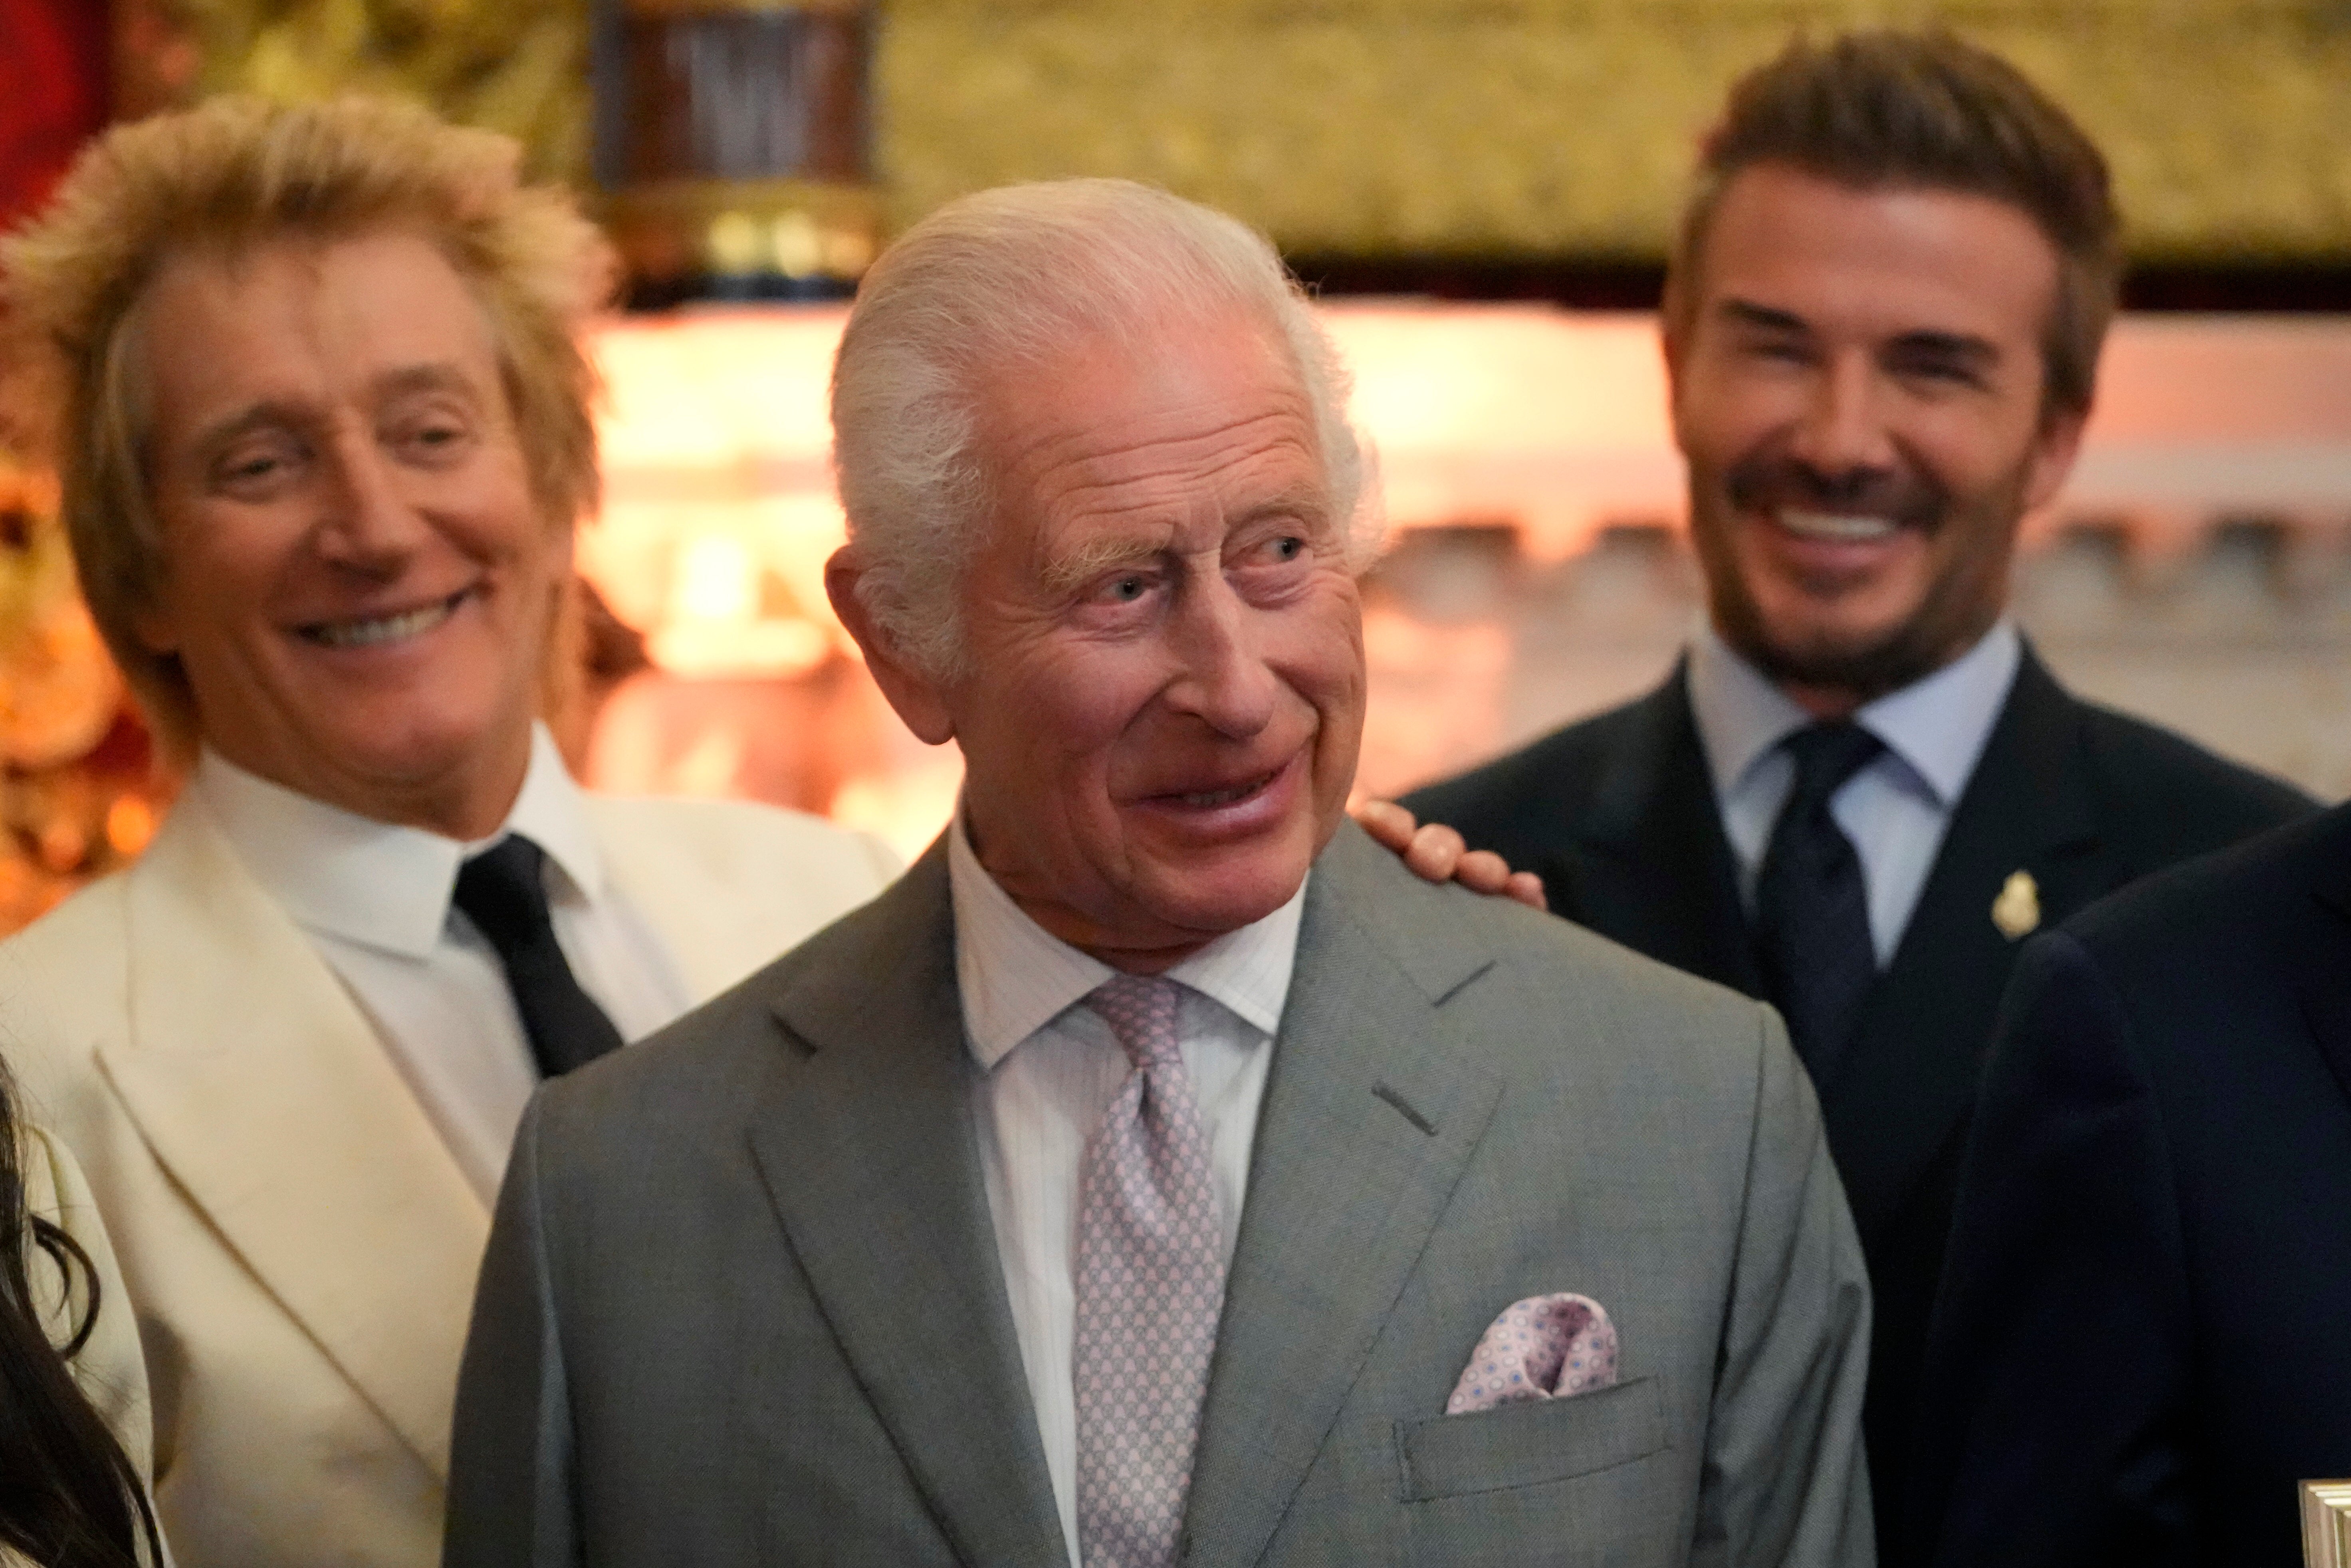 King Charles all smiles as he hosts David Beckham and Rod Stewart at awards ceremony